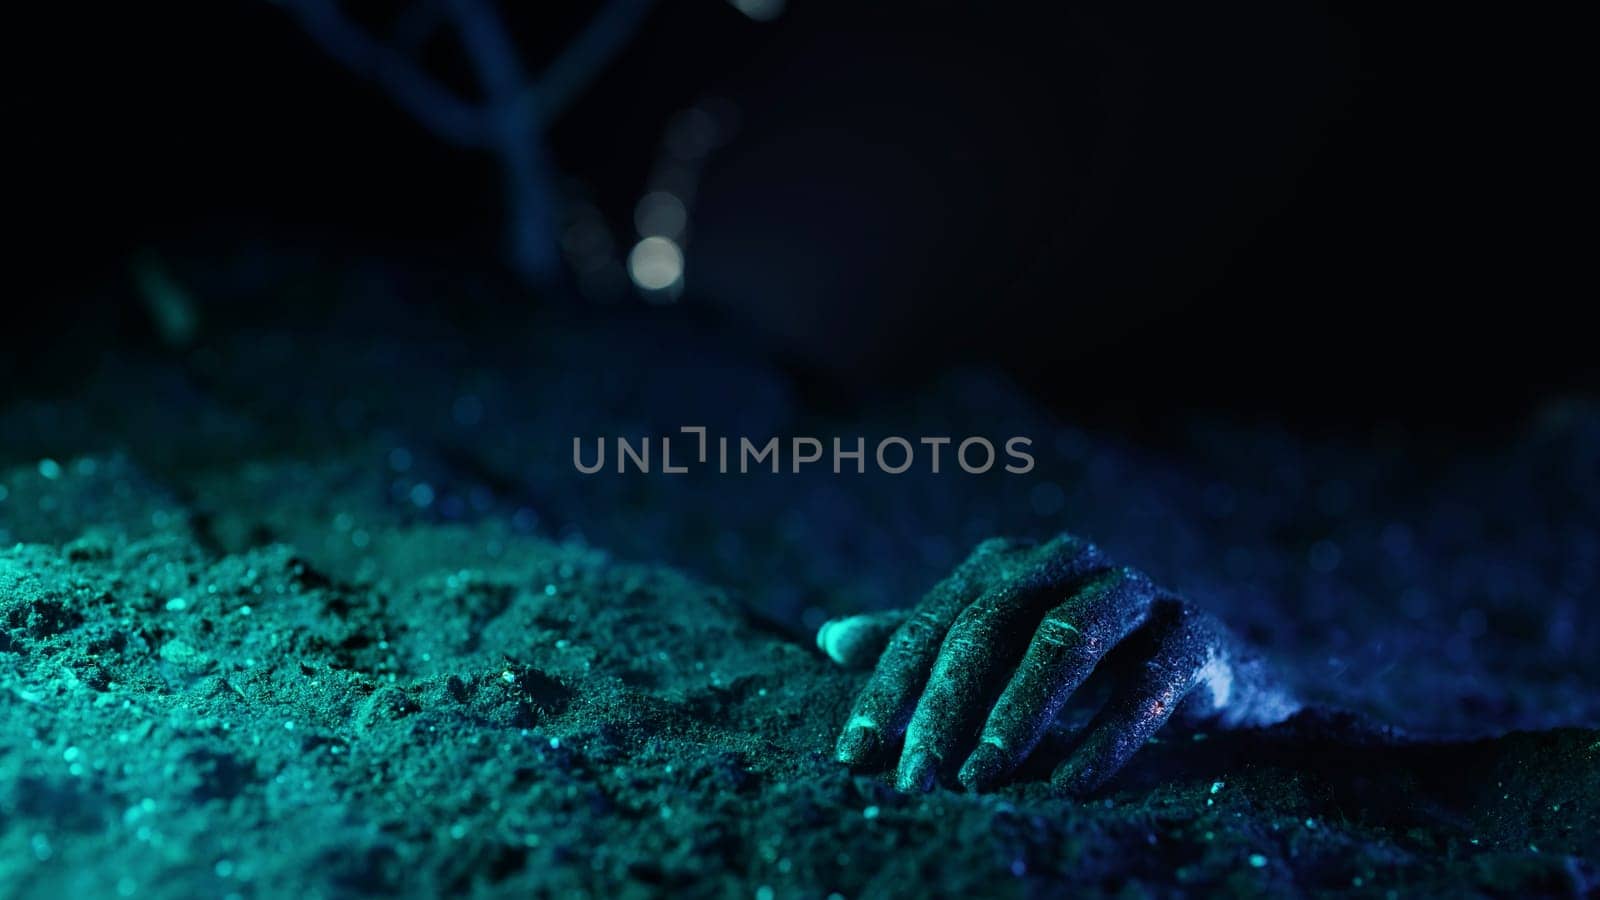 Zombie woman hand crawl in soil on grave. Creepy halloween moment, undead.Cemetery, halloween concept. Living nightmare comes to life. High quality